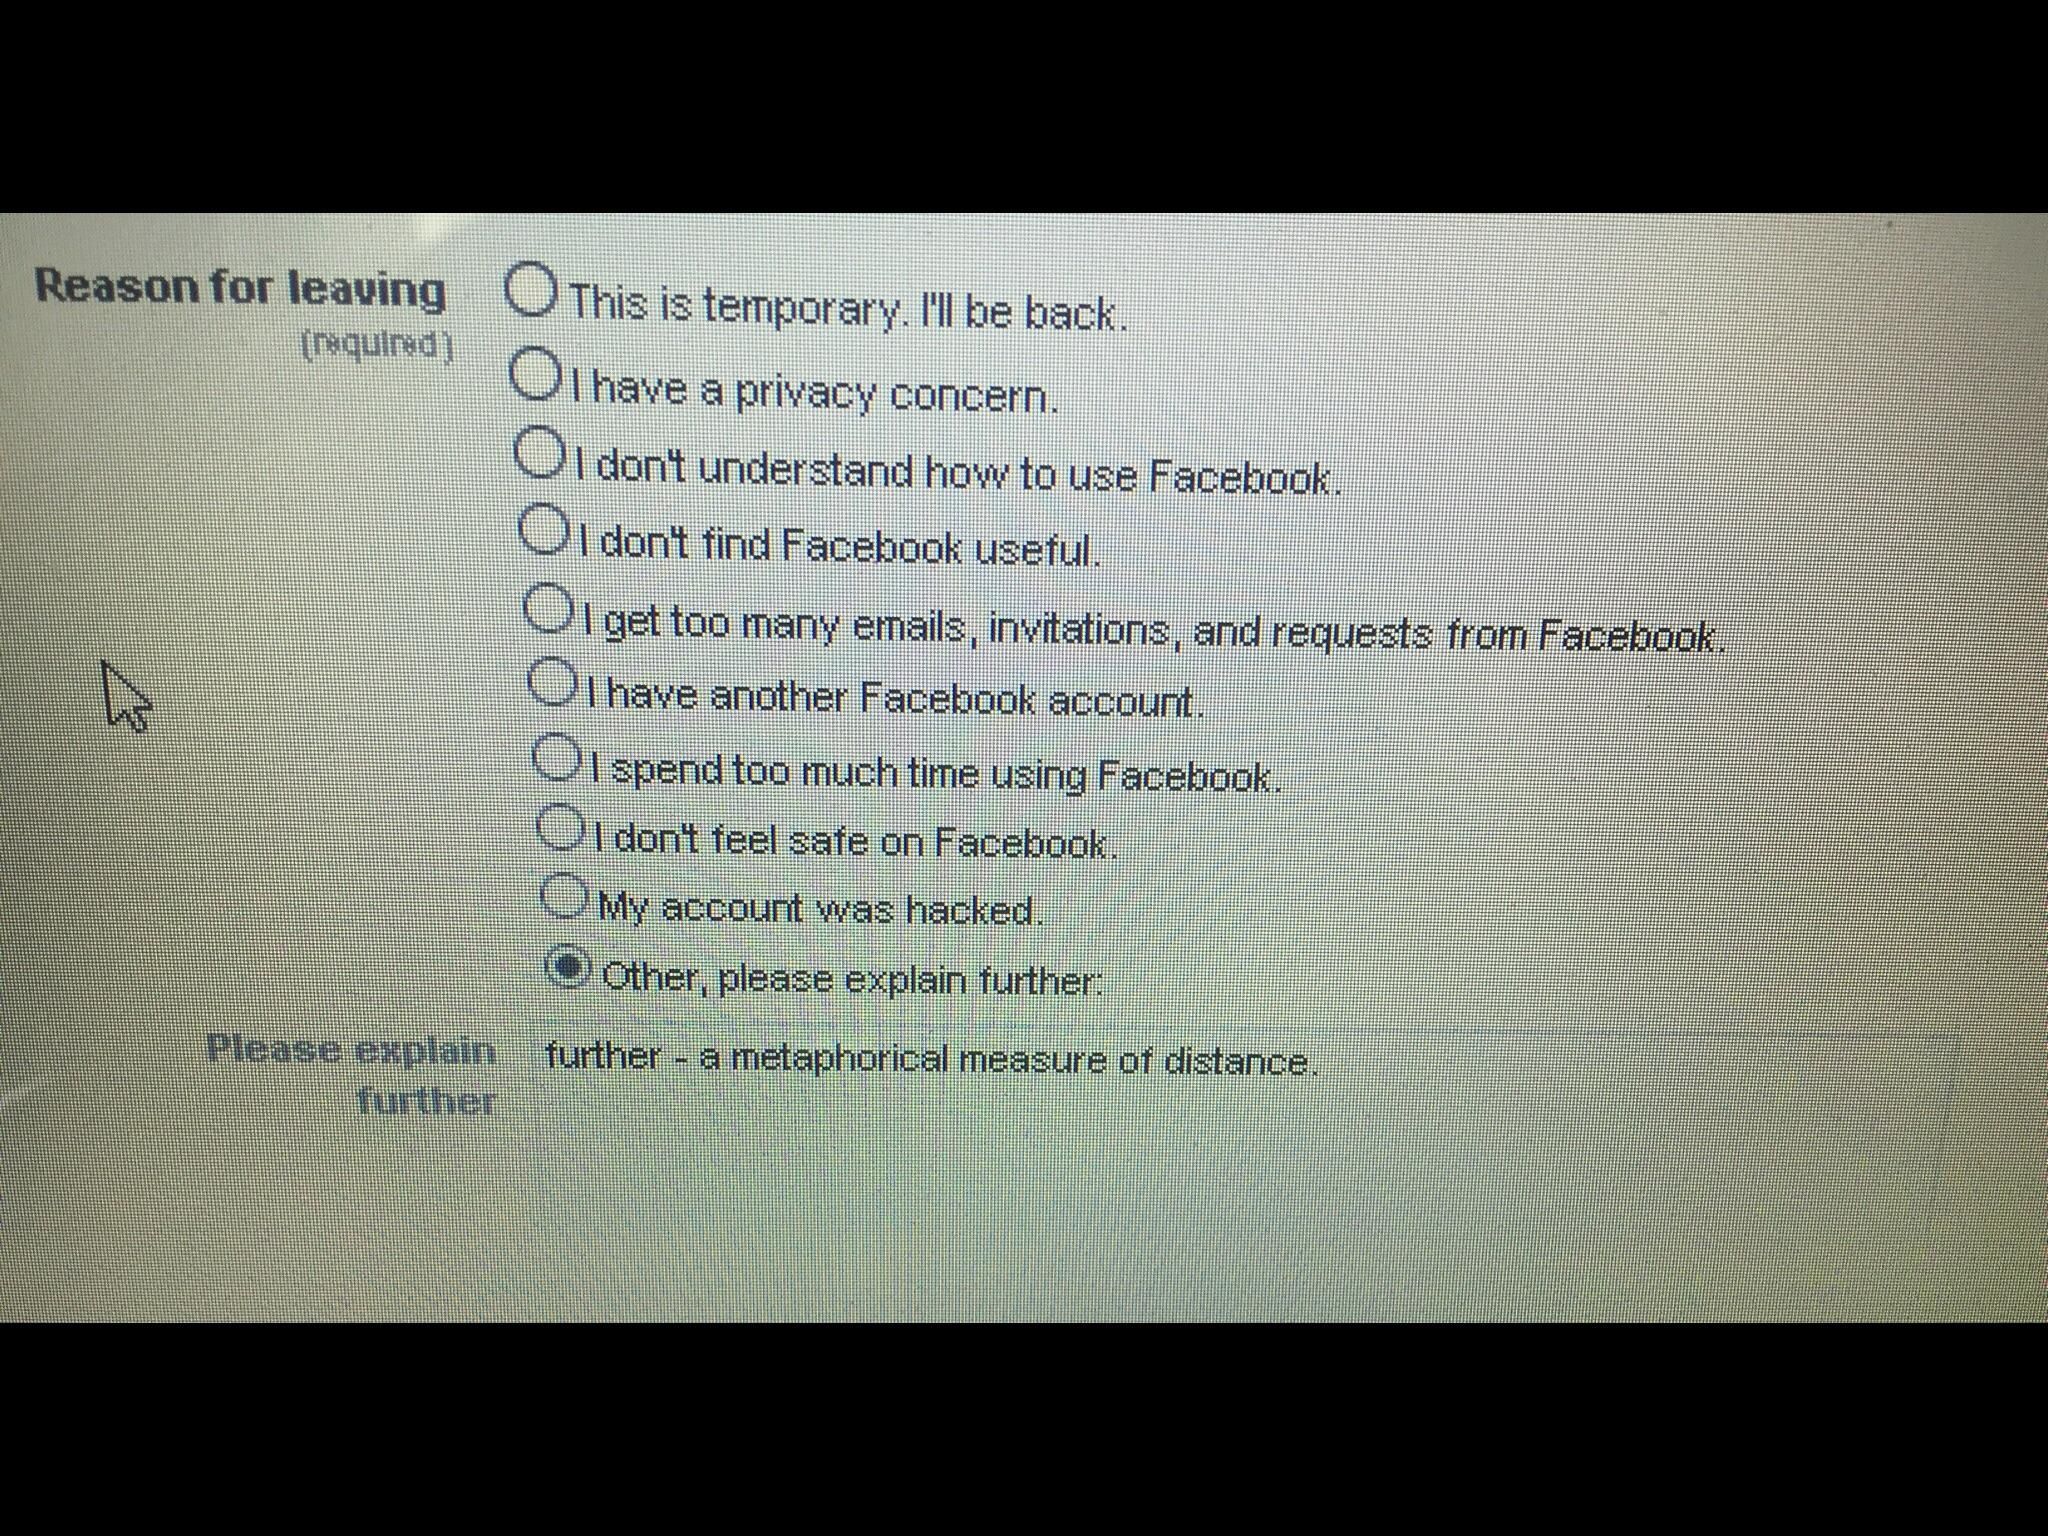 Apparently Facebook requires you to give an explanation if you try to deactivate your account...